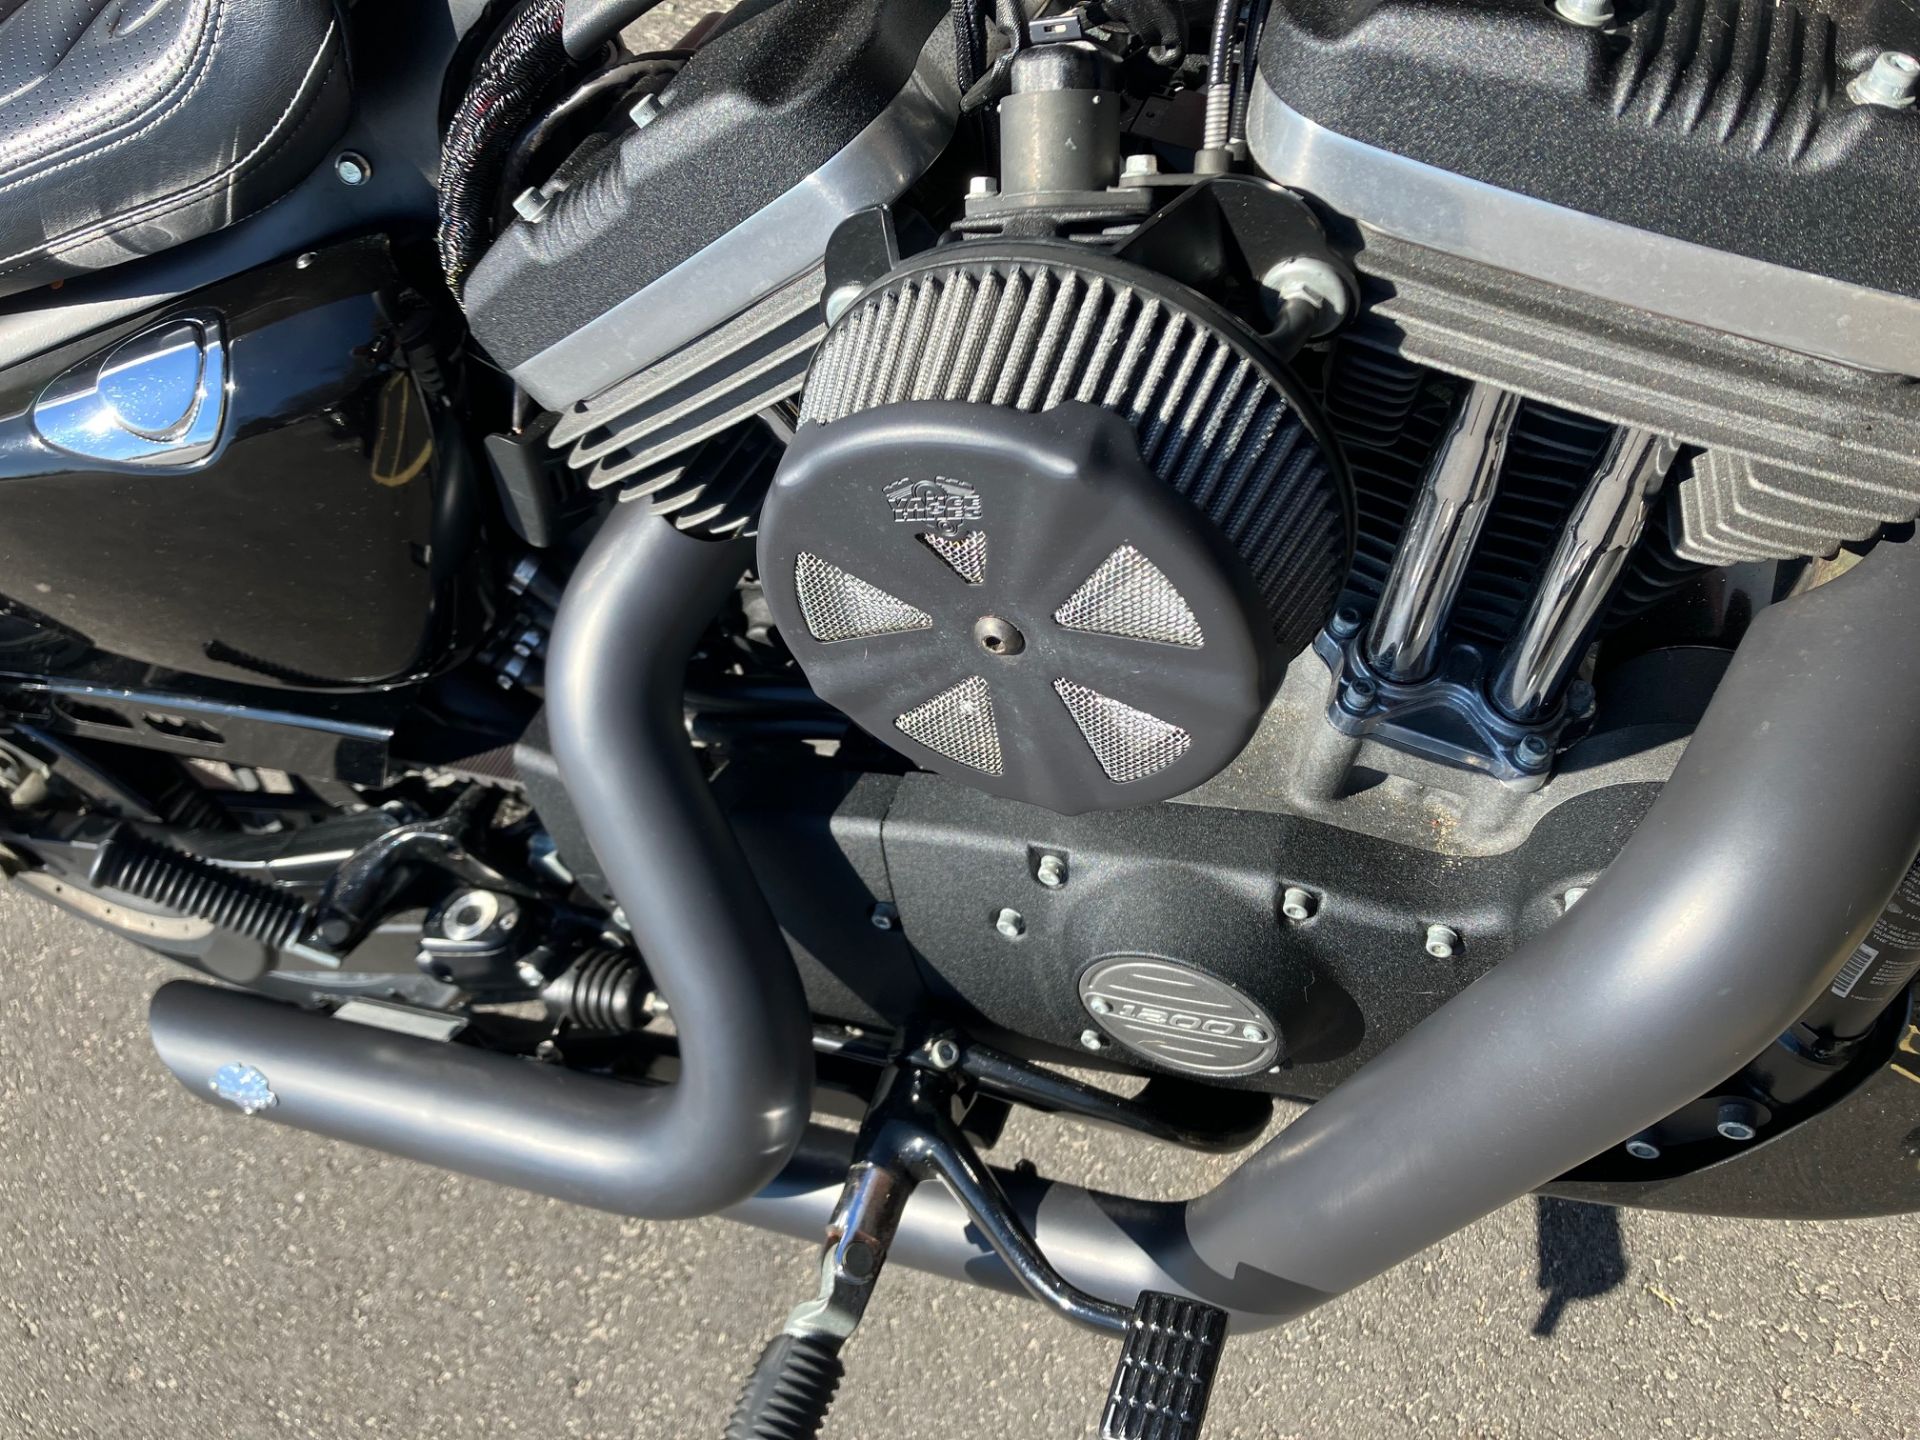 2017 Harley-Davidson ROADSTER in West Long Branch, New Jersey - Photo 9